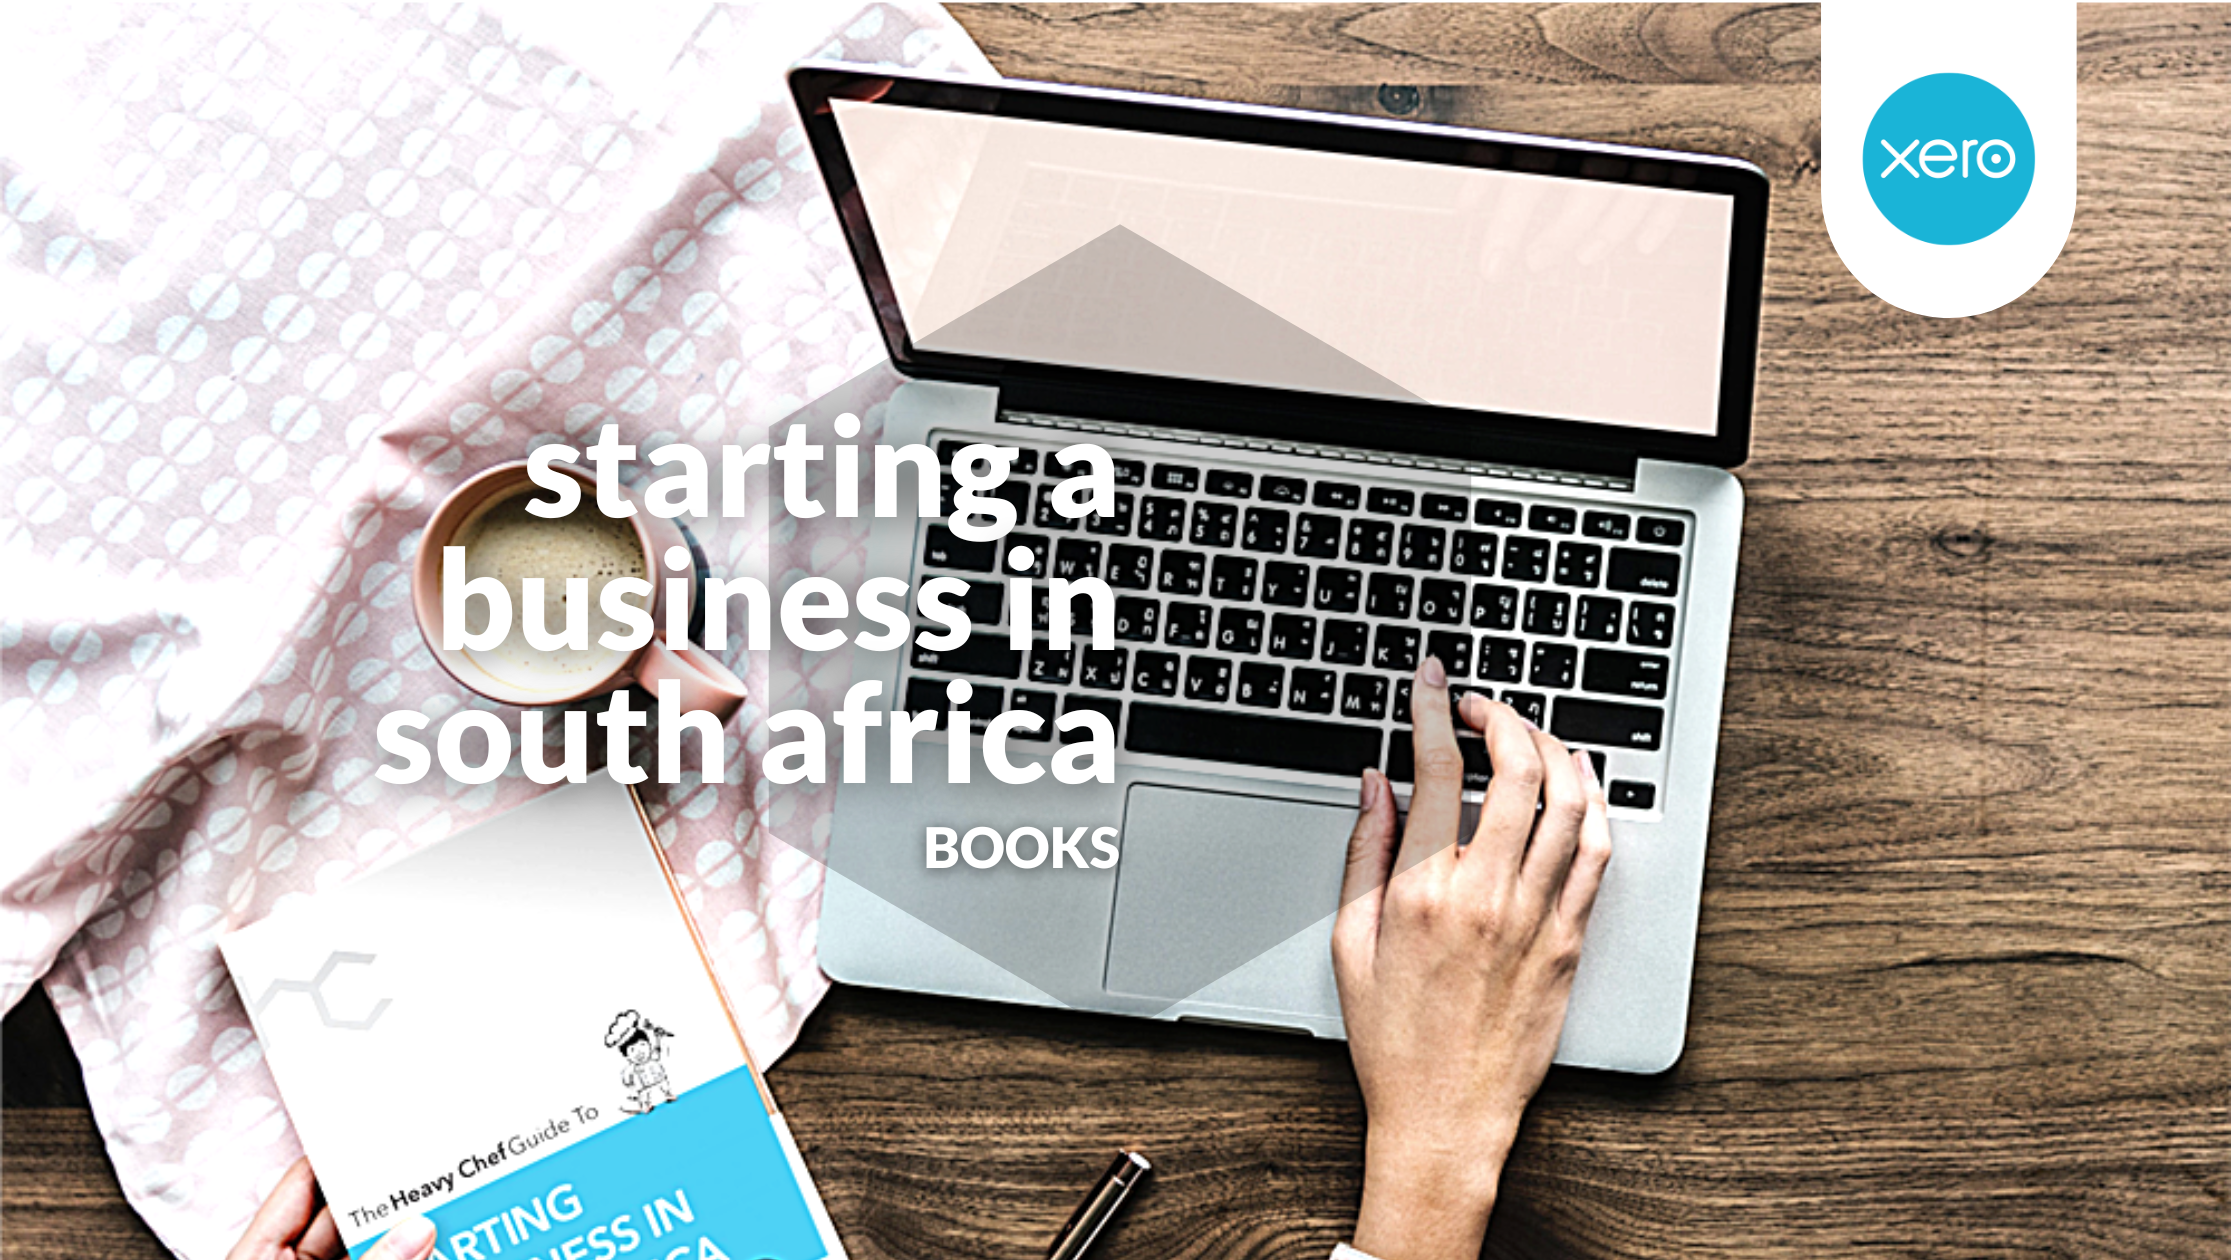 The Heavy Chef Guide To Starting A Business In South Africa